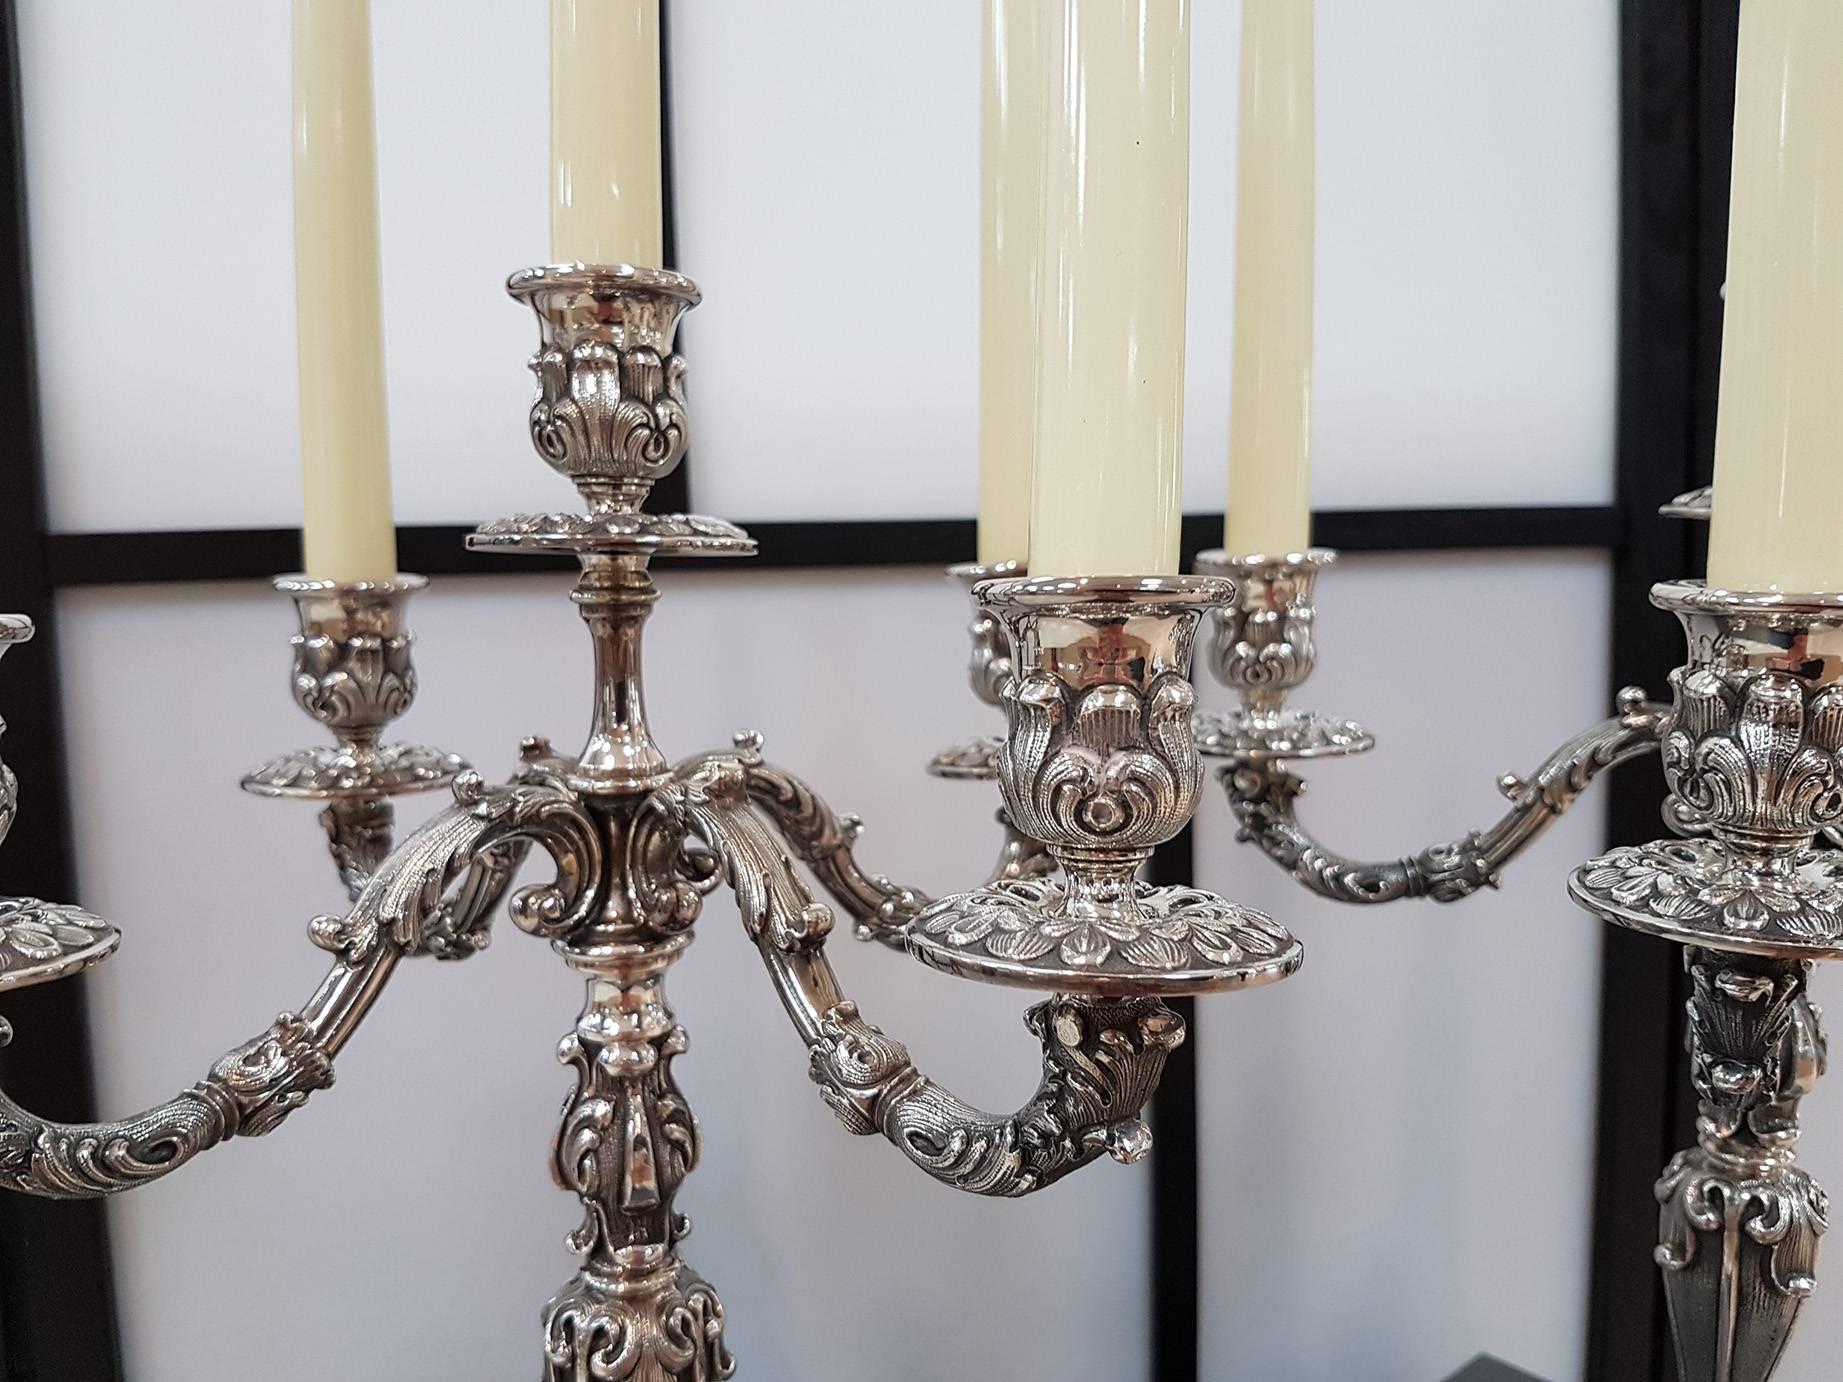 Pr. of Italian Barocco revival five light candelabras. 
These Candlesticks are the result of the excellence of Italian craftsmanship
that cures to perfection details and design balances

5,300 grams.